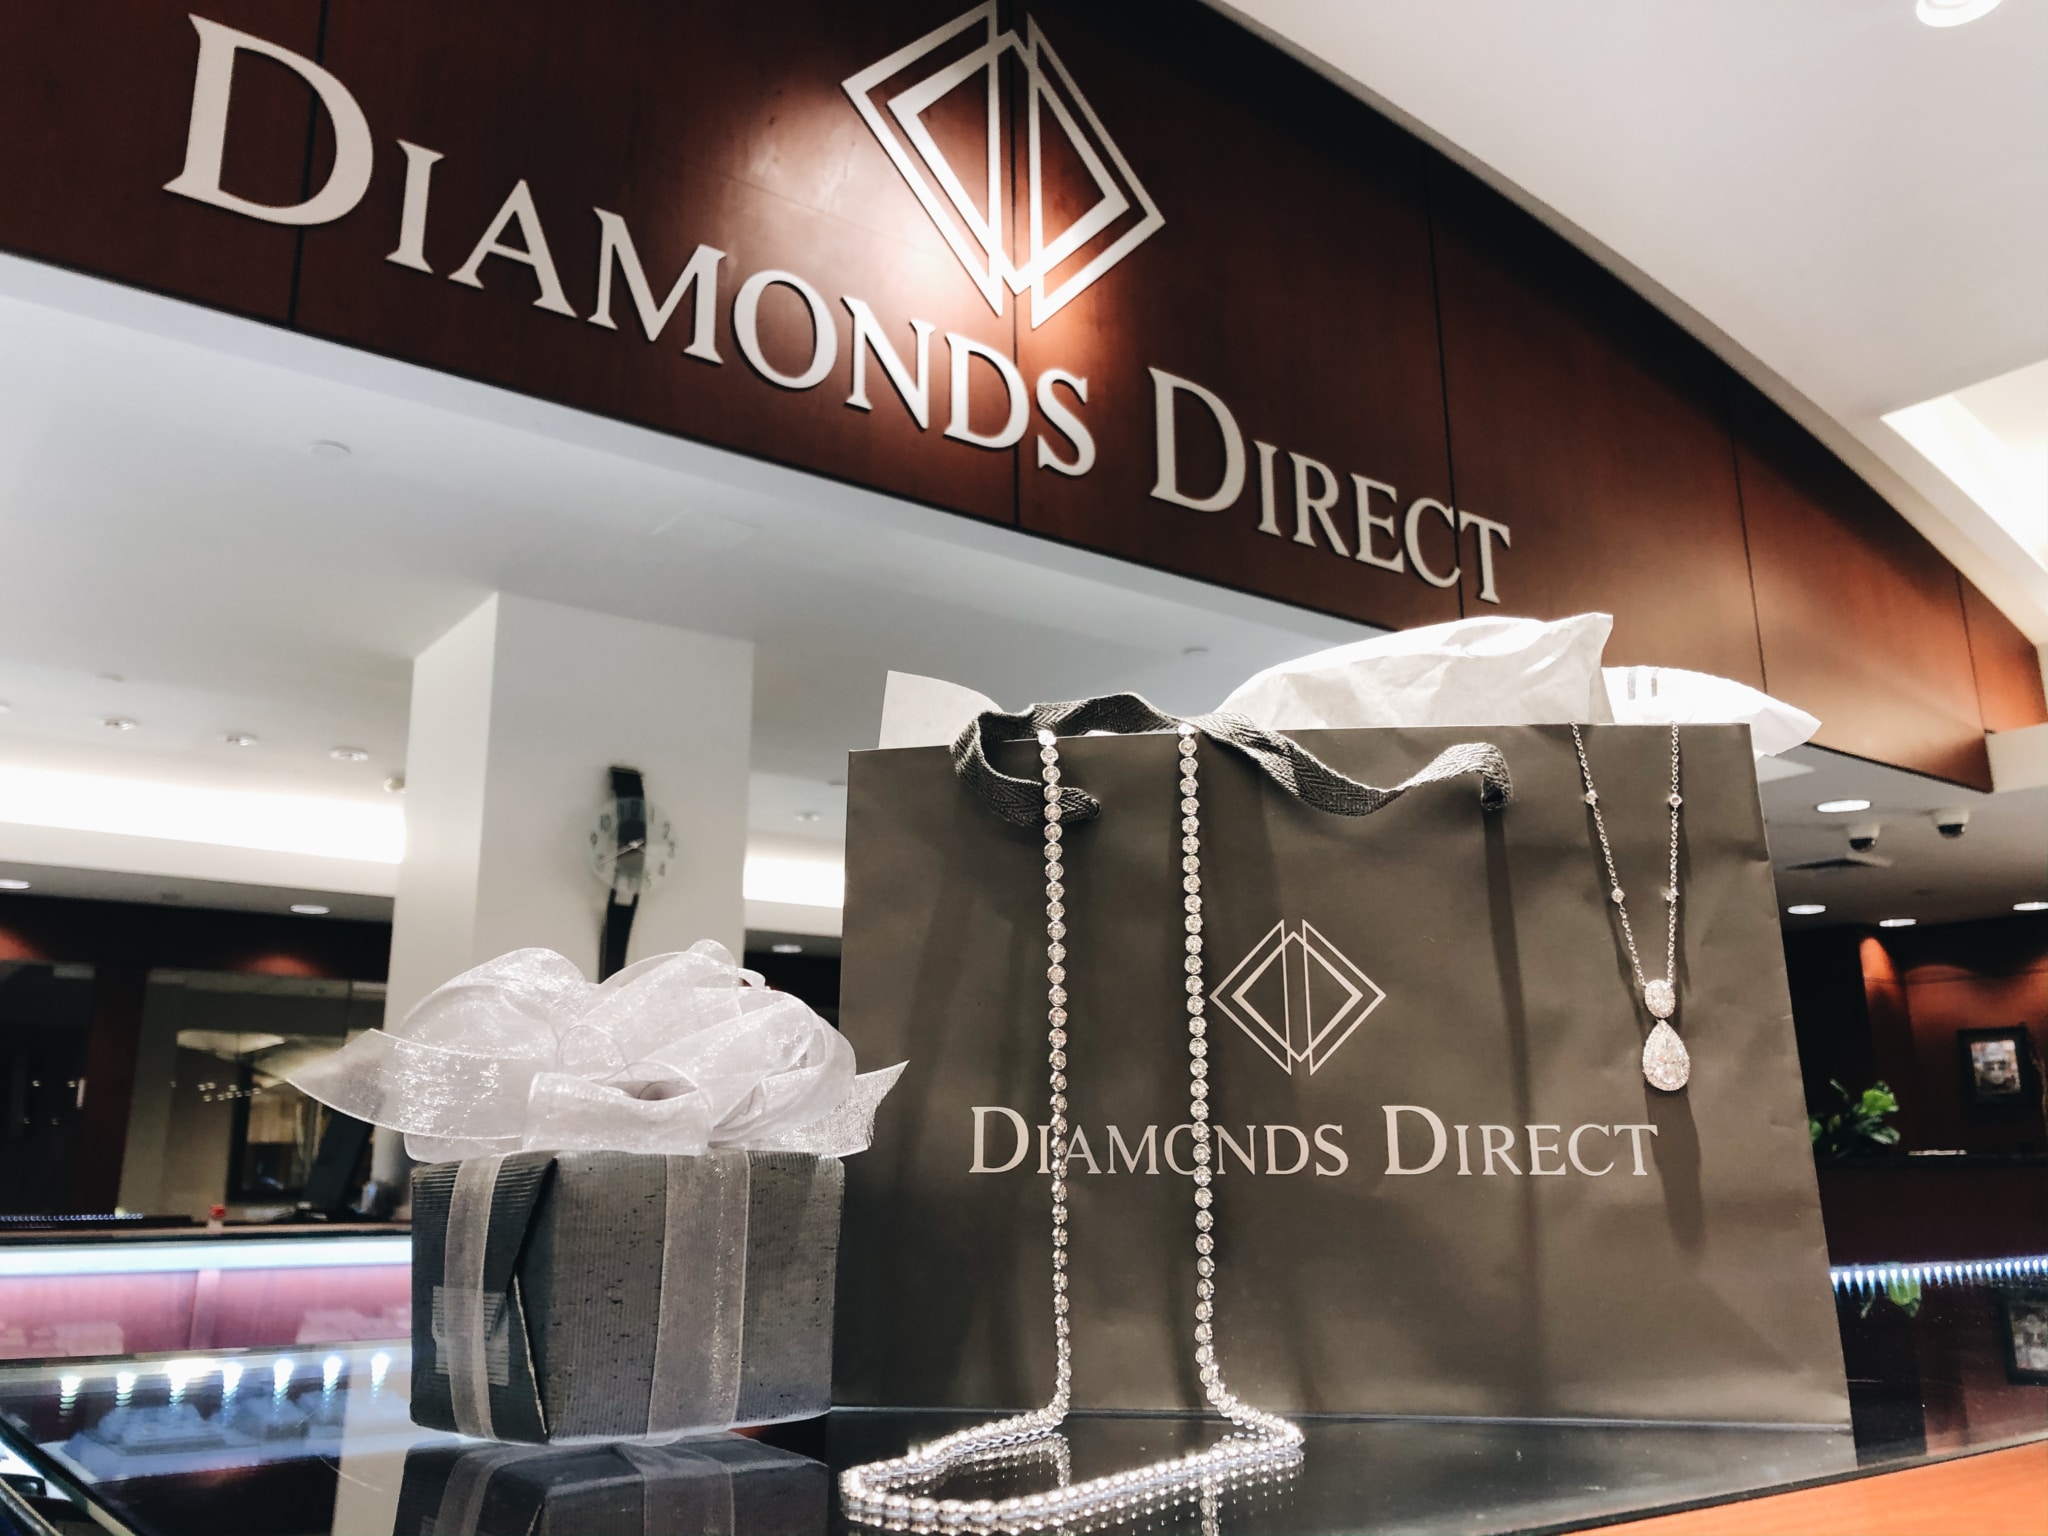 Diamonds.Direct 20 7 gifts to buy at the Diamonds Direct earring event in Birmingham, from $232-$2025